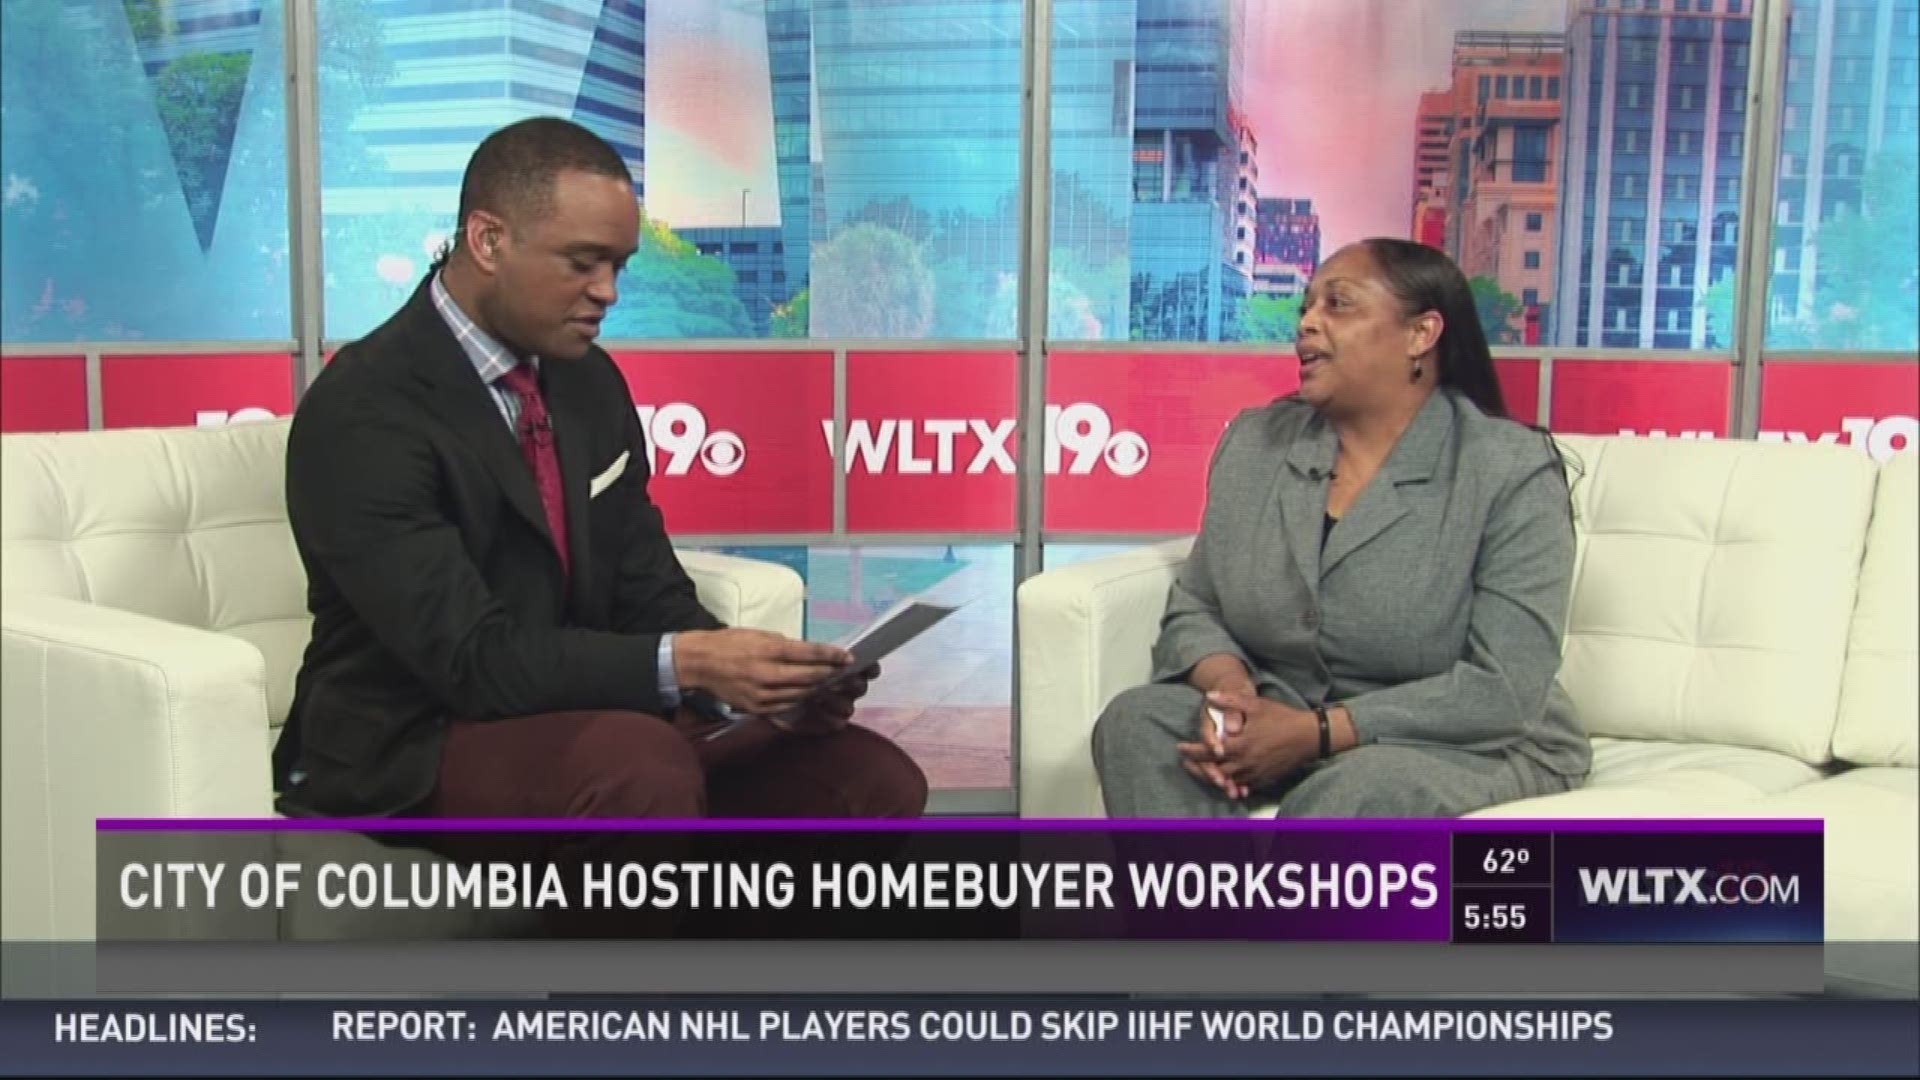 Community Development Loan Officer, Rachelle Jennings, joins Deon to discuss how you can attend a free homebuyer workshop next Tuesday!